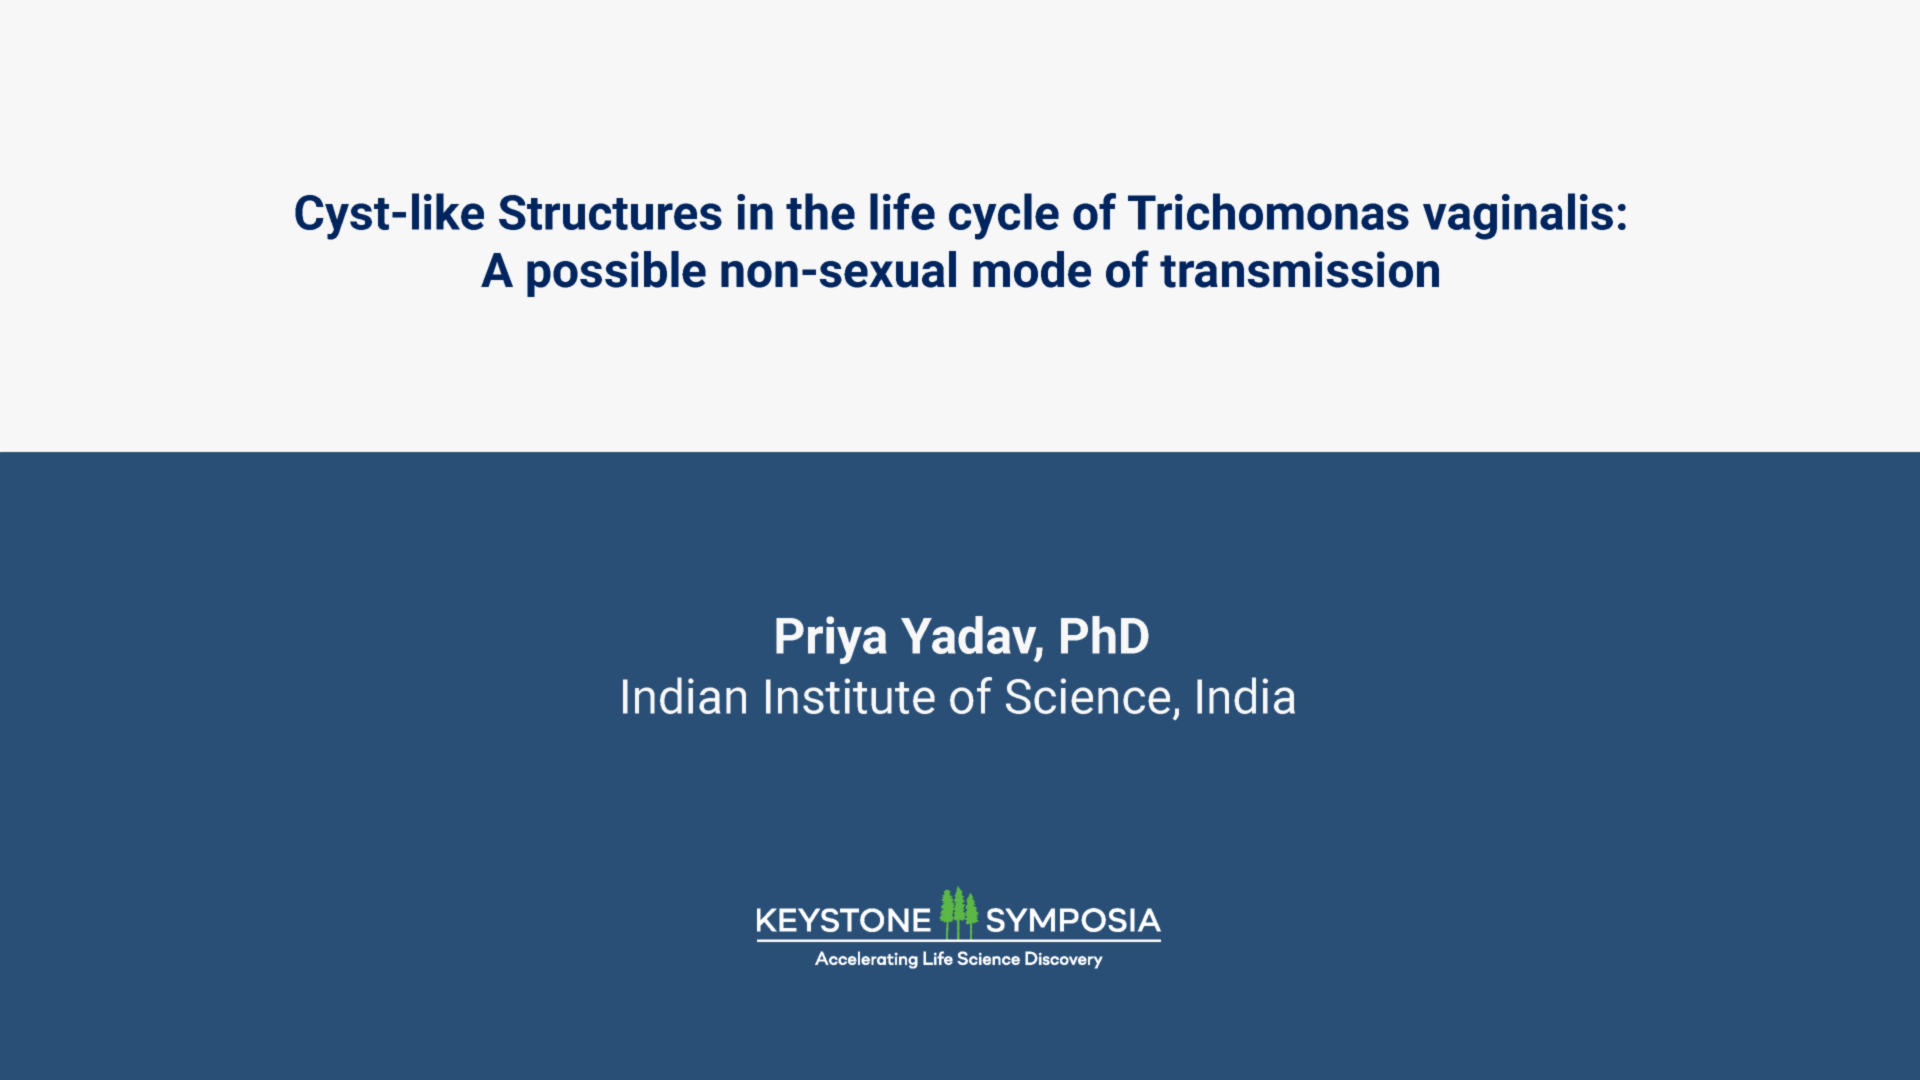 Cyst-like Structures in the life cycle of Trichomonas vaginalis: A possible non-sexual mode of transmission icon